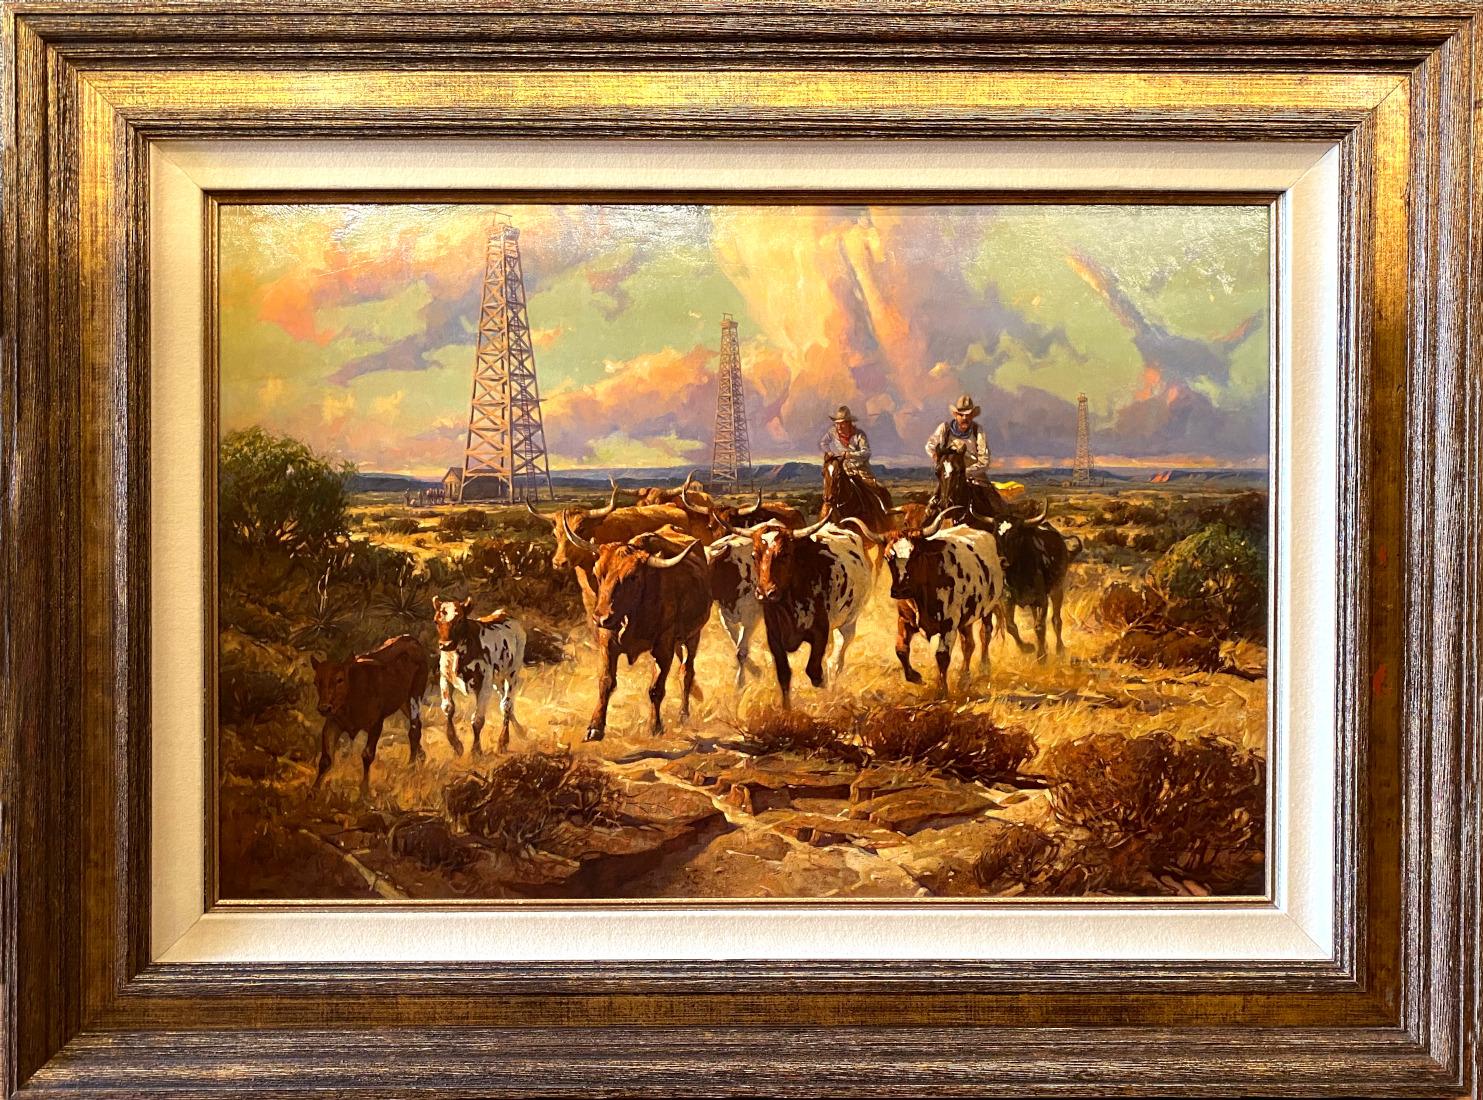 Robert Summers Animal Painting - "TEXAS GOLD"  LONGHORNS AND OIL DERRICKS AND COWBOYS